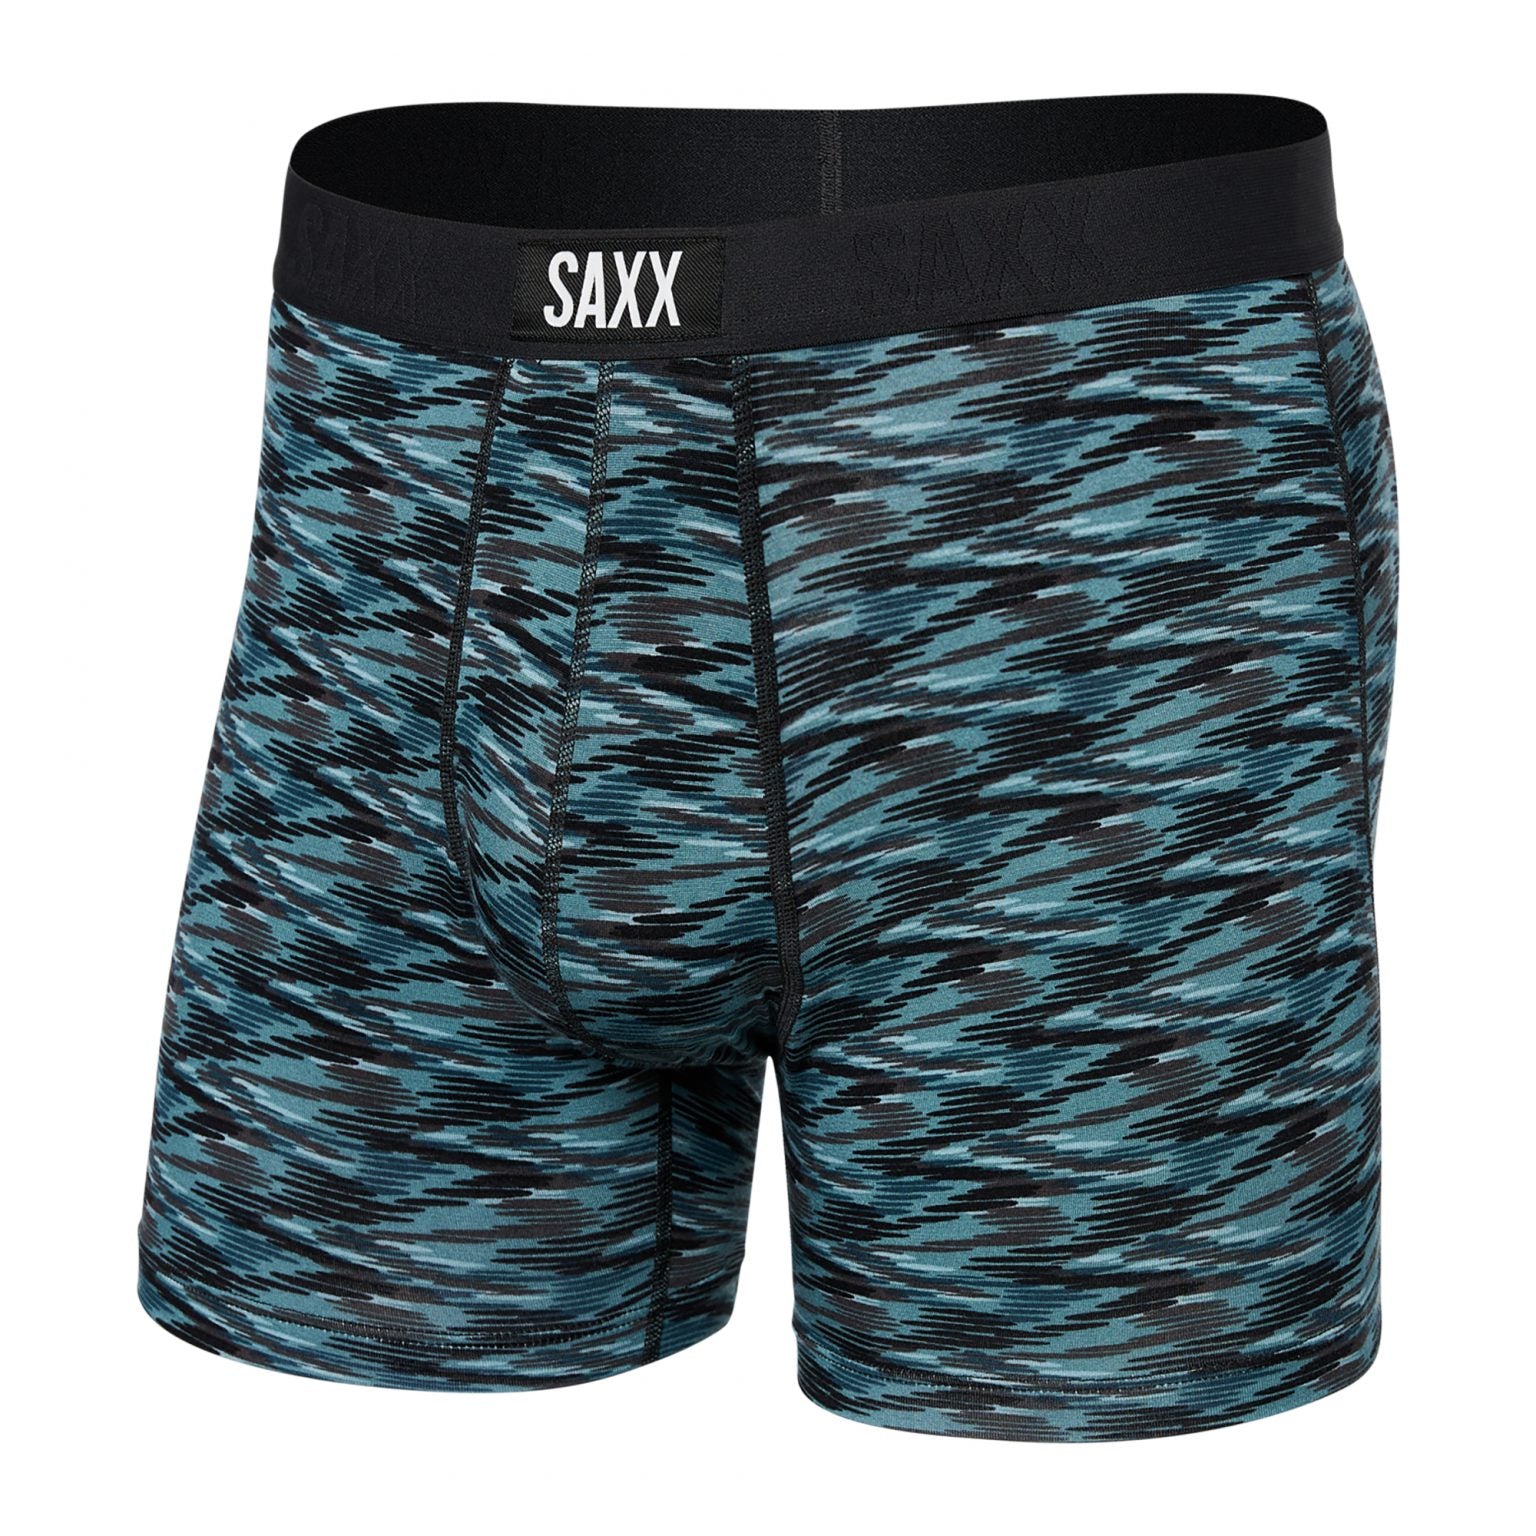 SAXX Vibe Super Soft Men's Boxer Brief - Worthing Watersports - Tops - SAXX